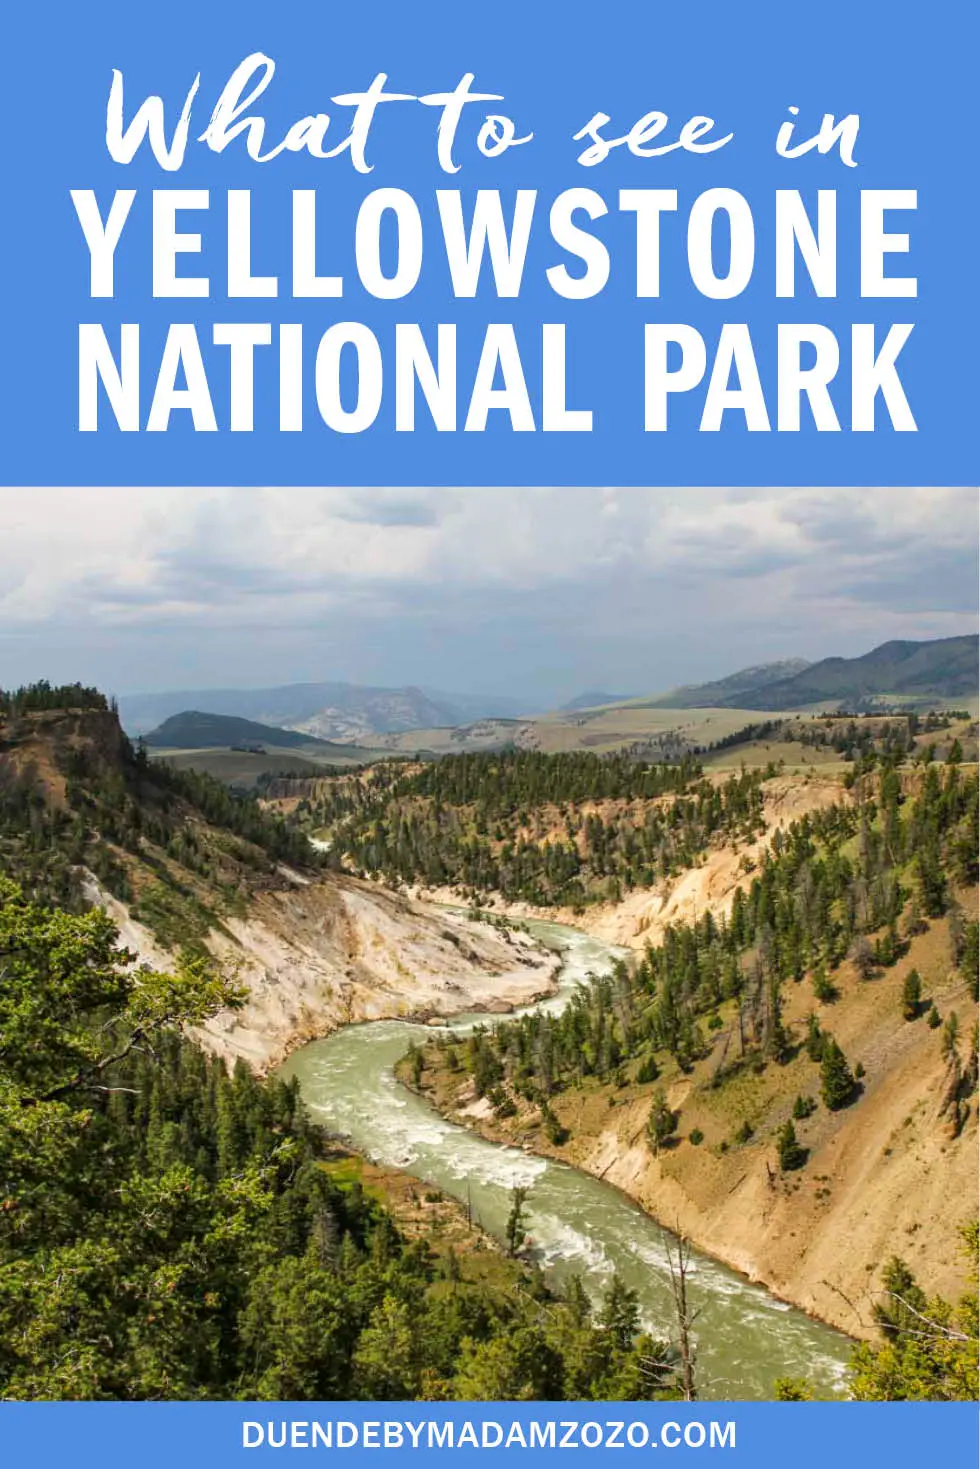 Image of river flowing through scenic landscape in Yellowstone National Park with text overlay reading "What to see in Yellowstone National Park"